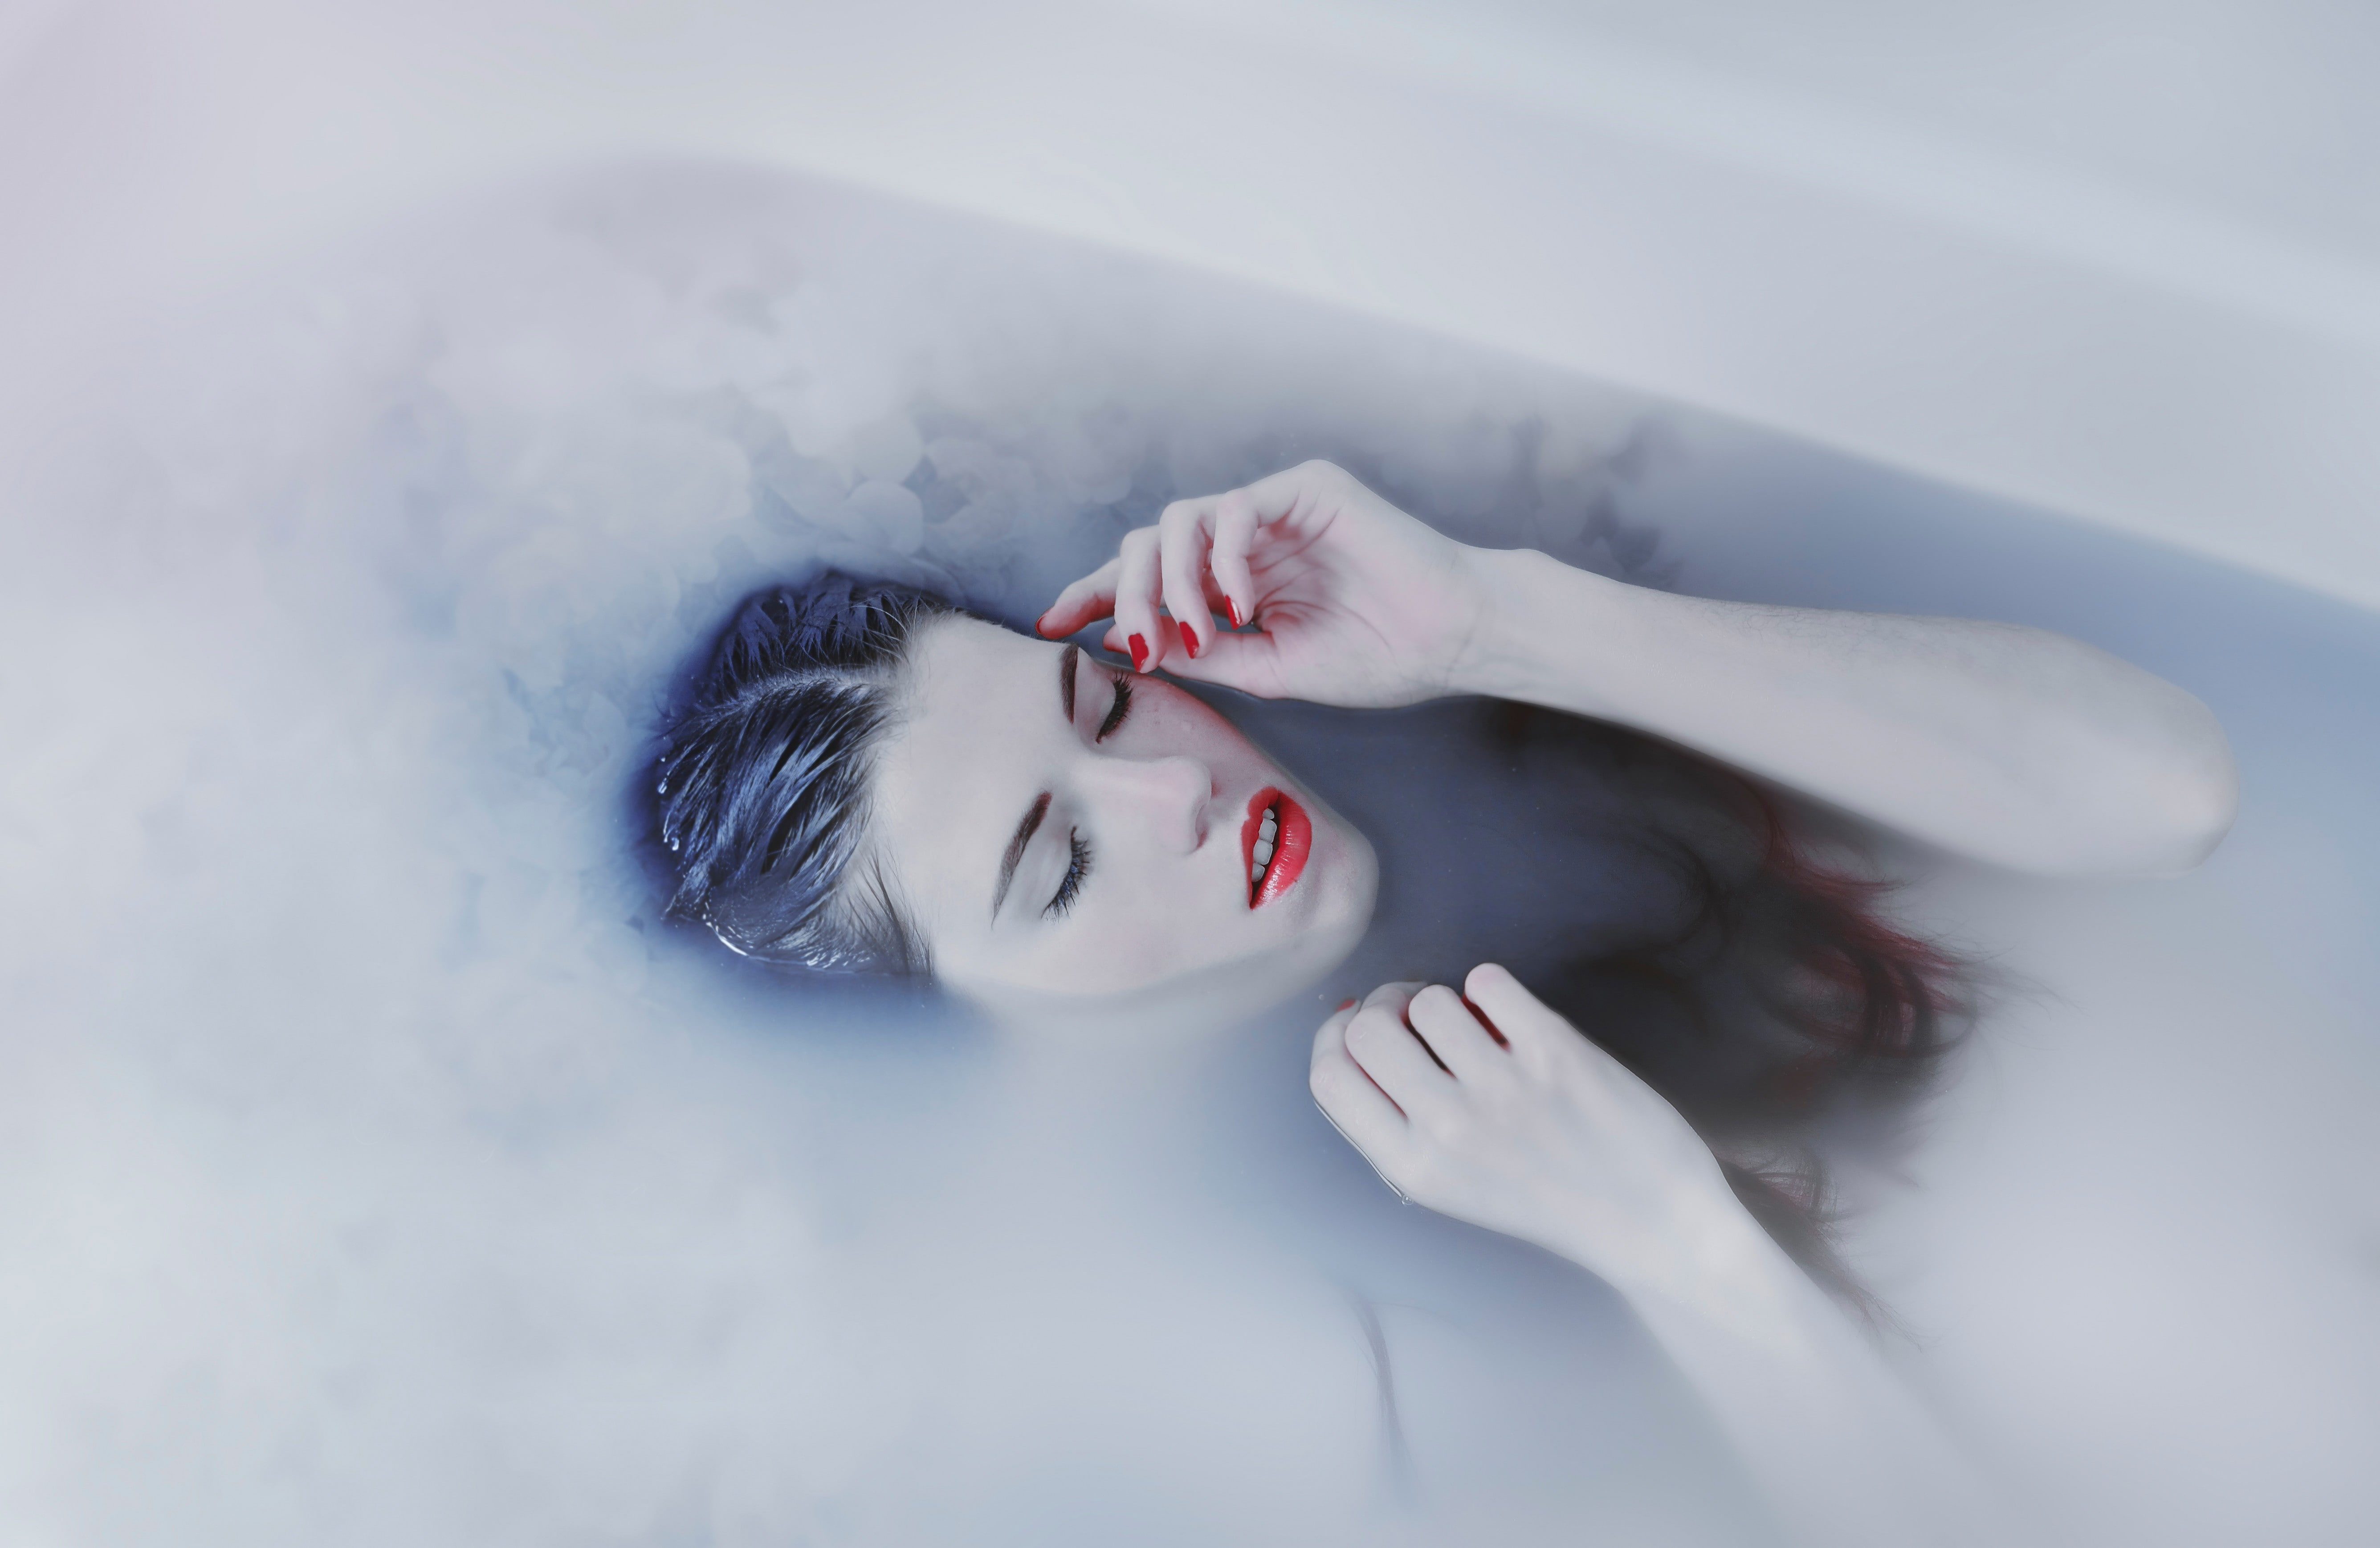 bathtub, model, women, closed eyes, painted nails, red lipstick